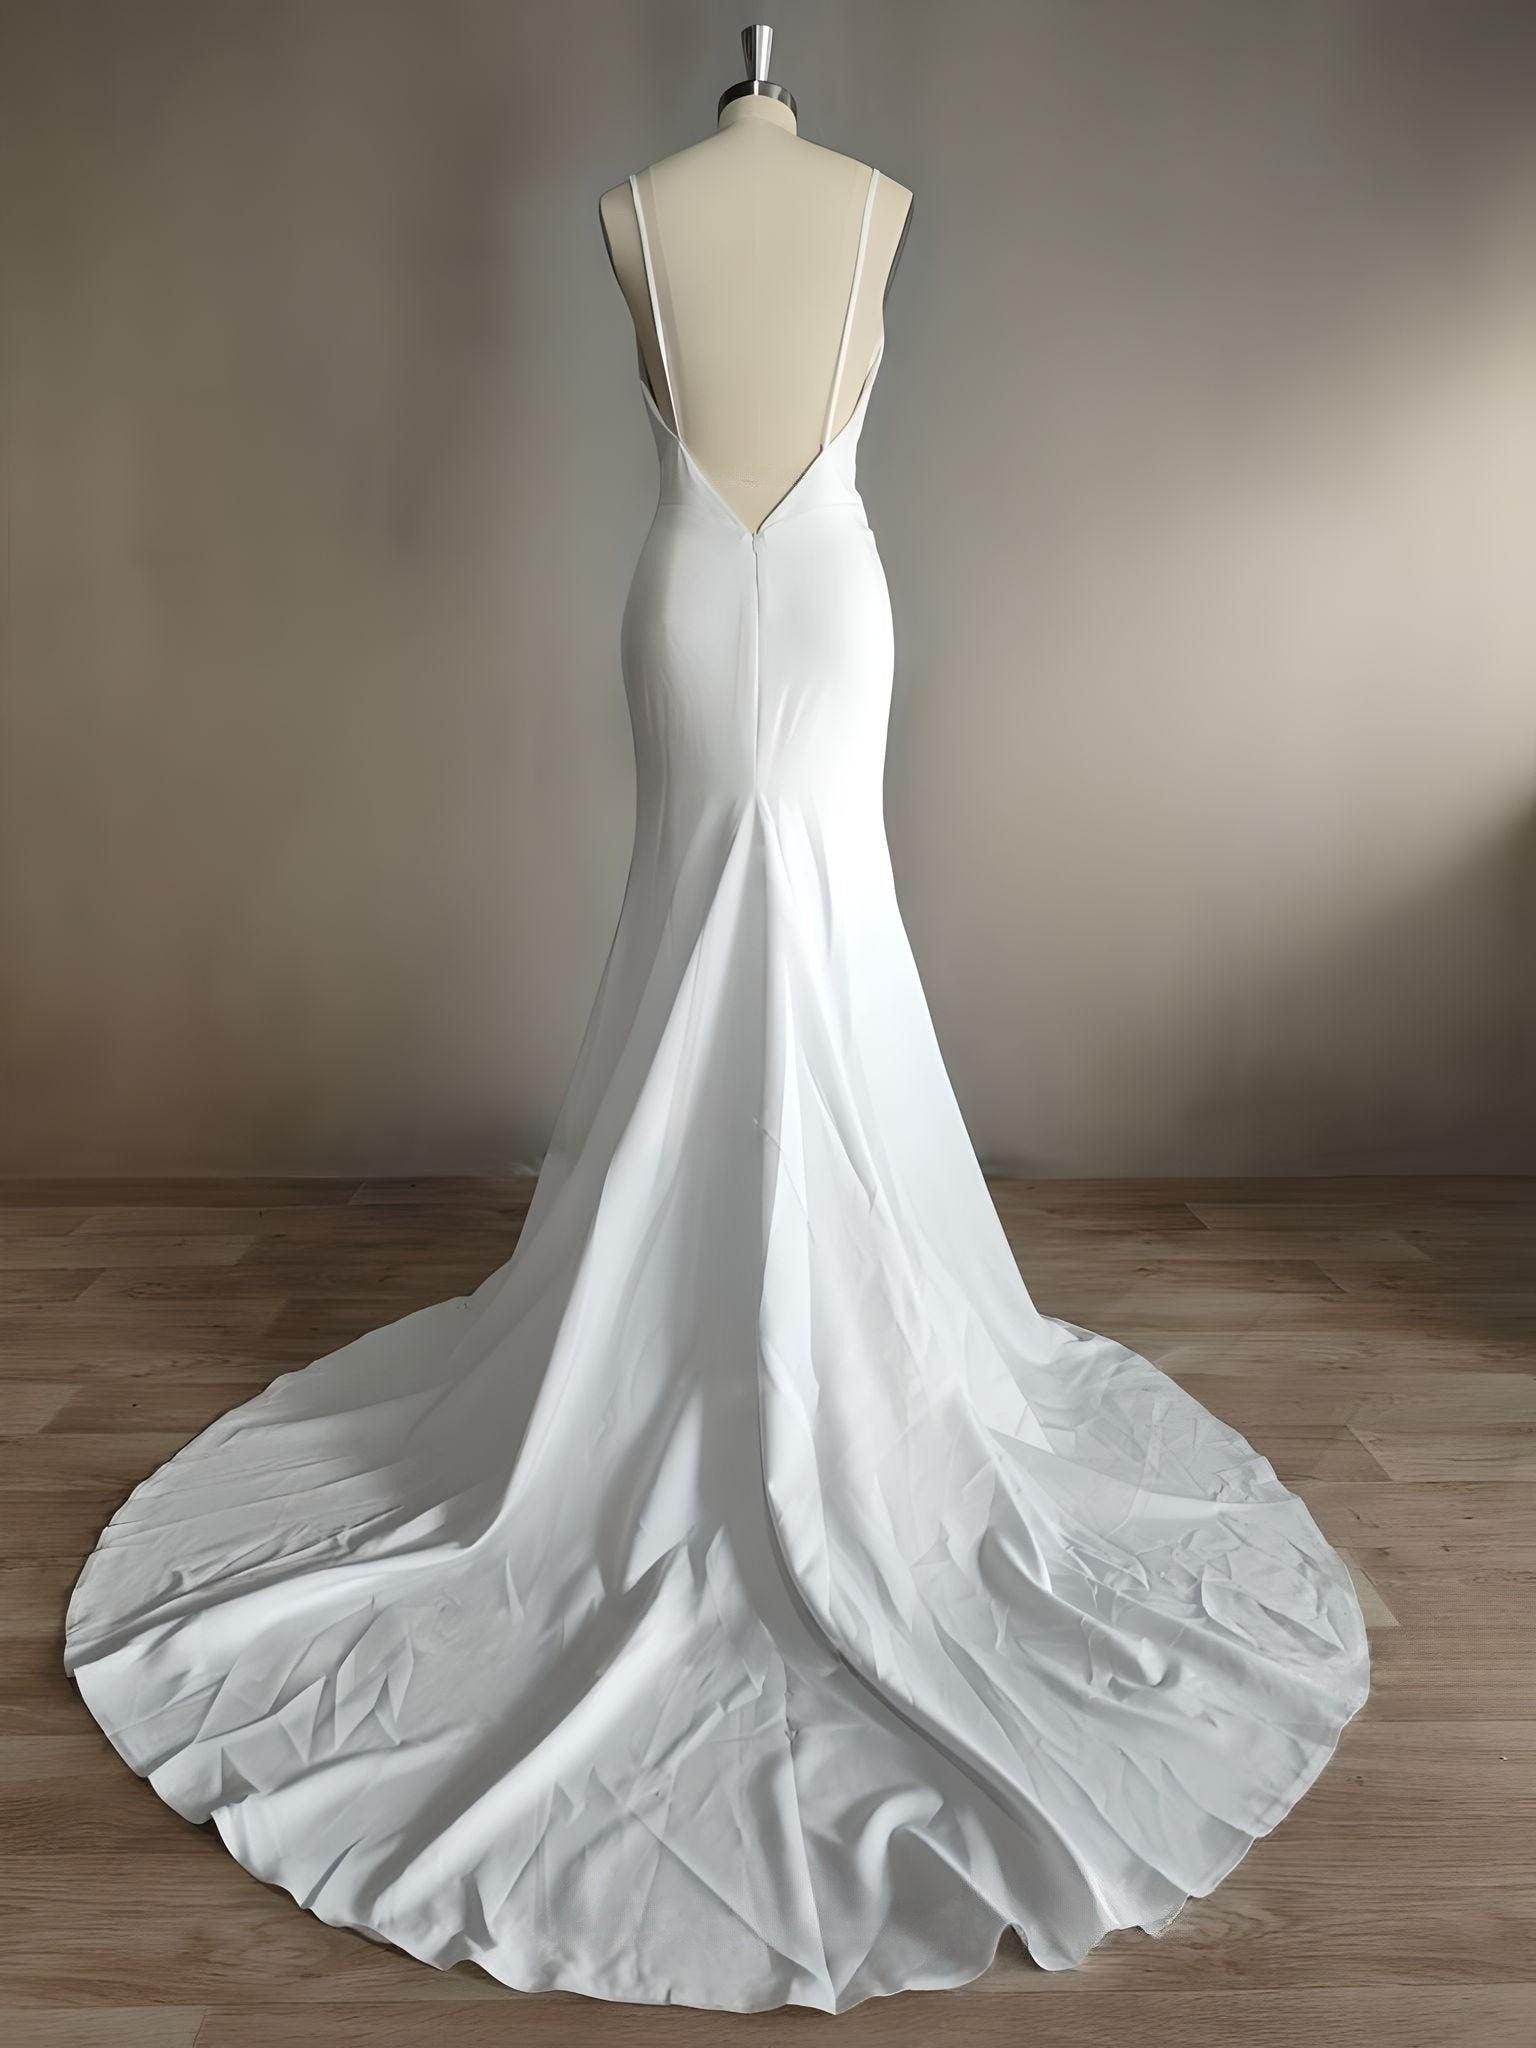 Spaghetti Straps Elegant Wedding Dress - Backless Wedding Gown with a train on a tailor figurine